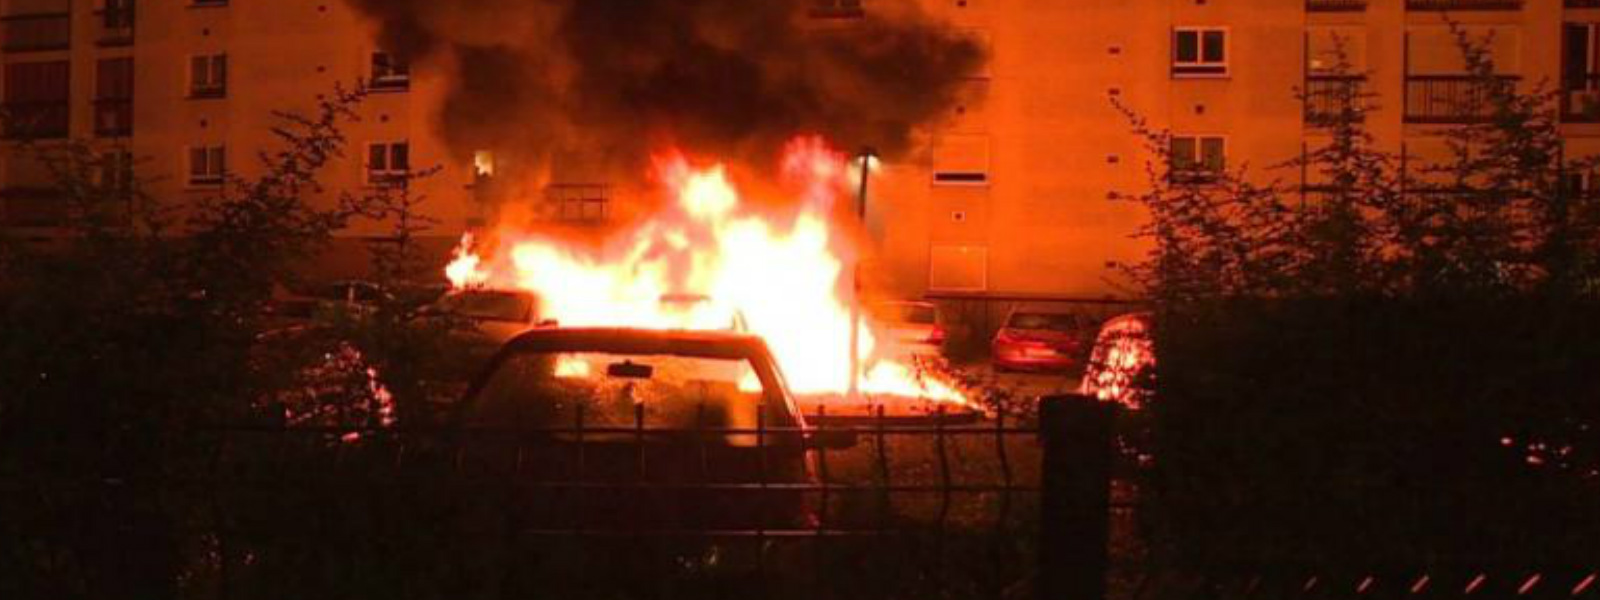 Cars burn in Nantes during third night of riots